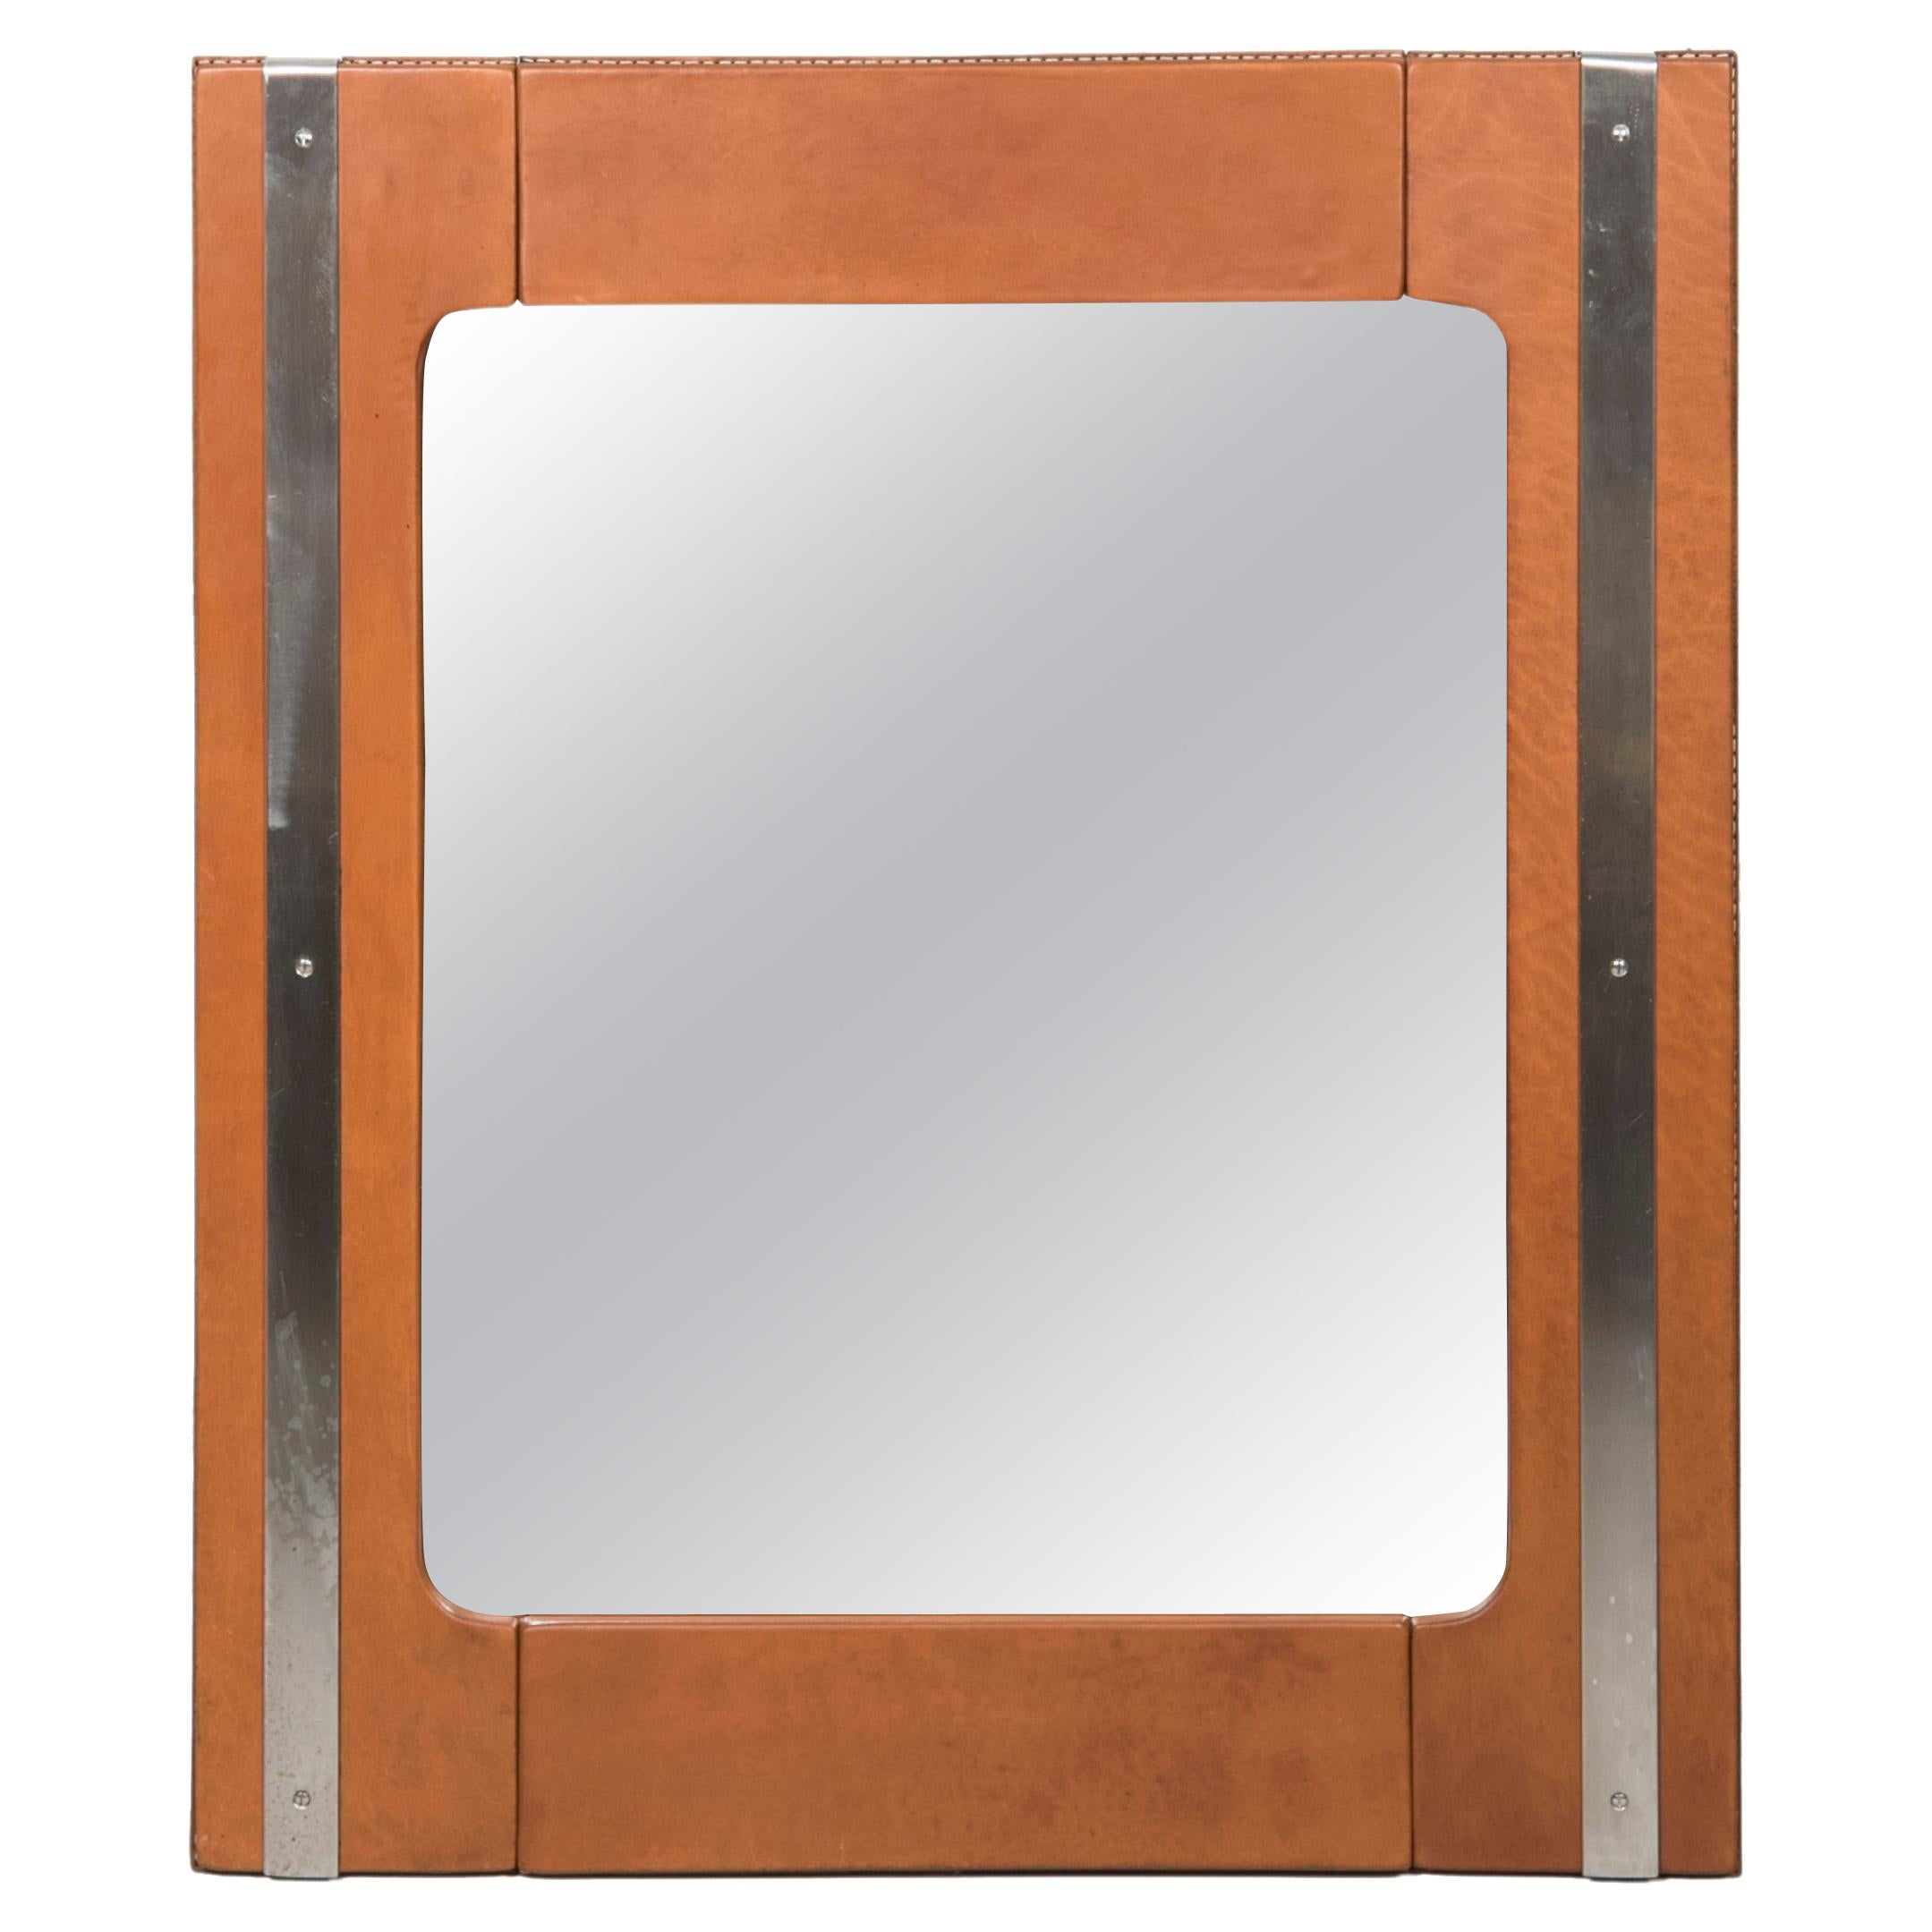 1950's Stitched Leather Mirror by Jacques Adnet For Sale